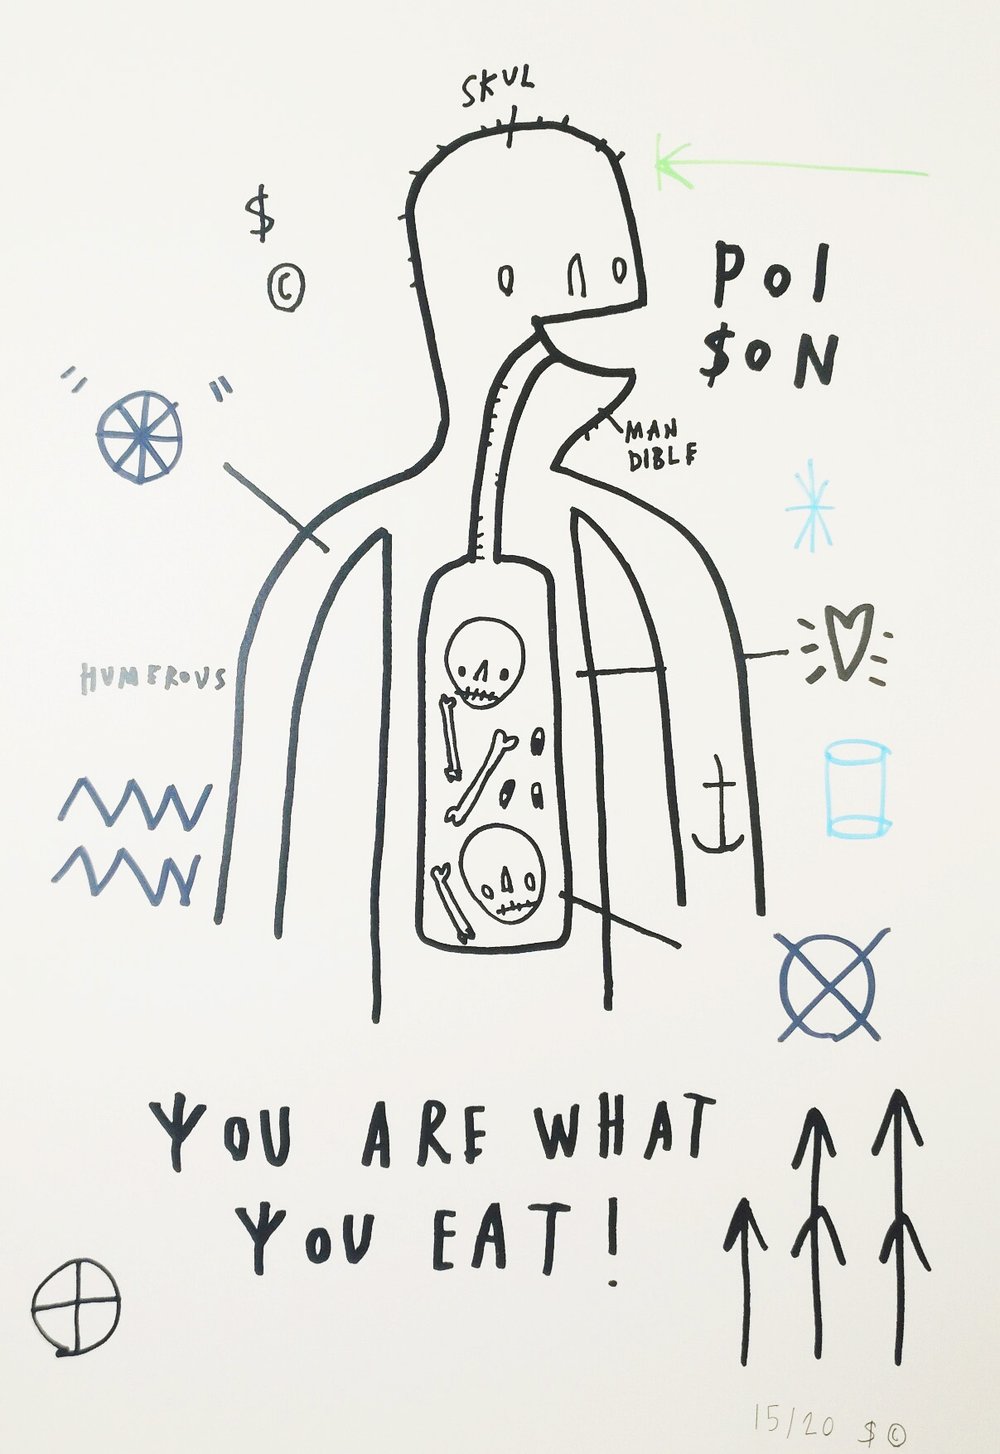 Image of 'You are what you eat’ (White edition) by Skeleton Cardboard